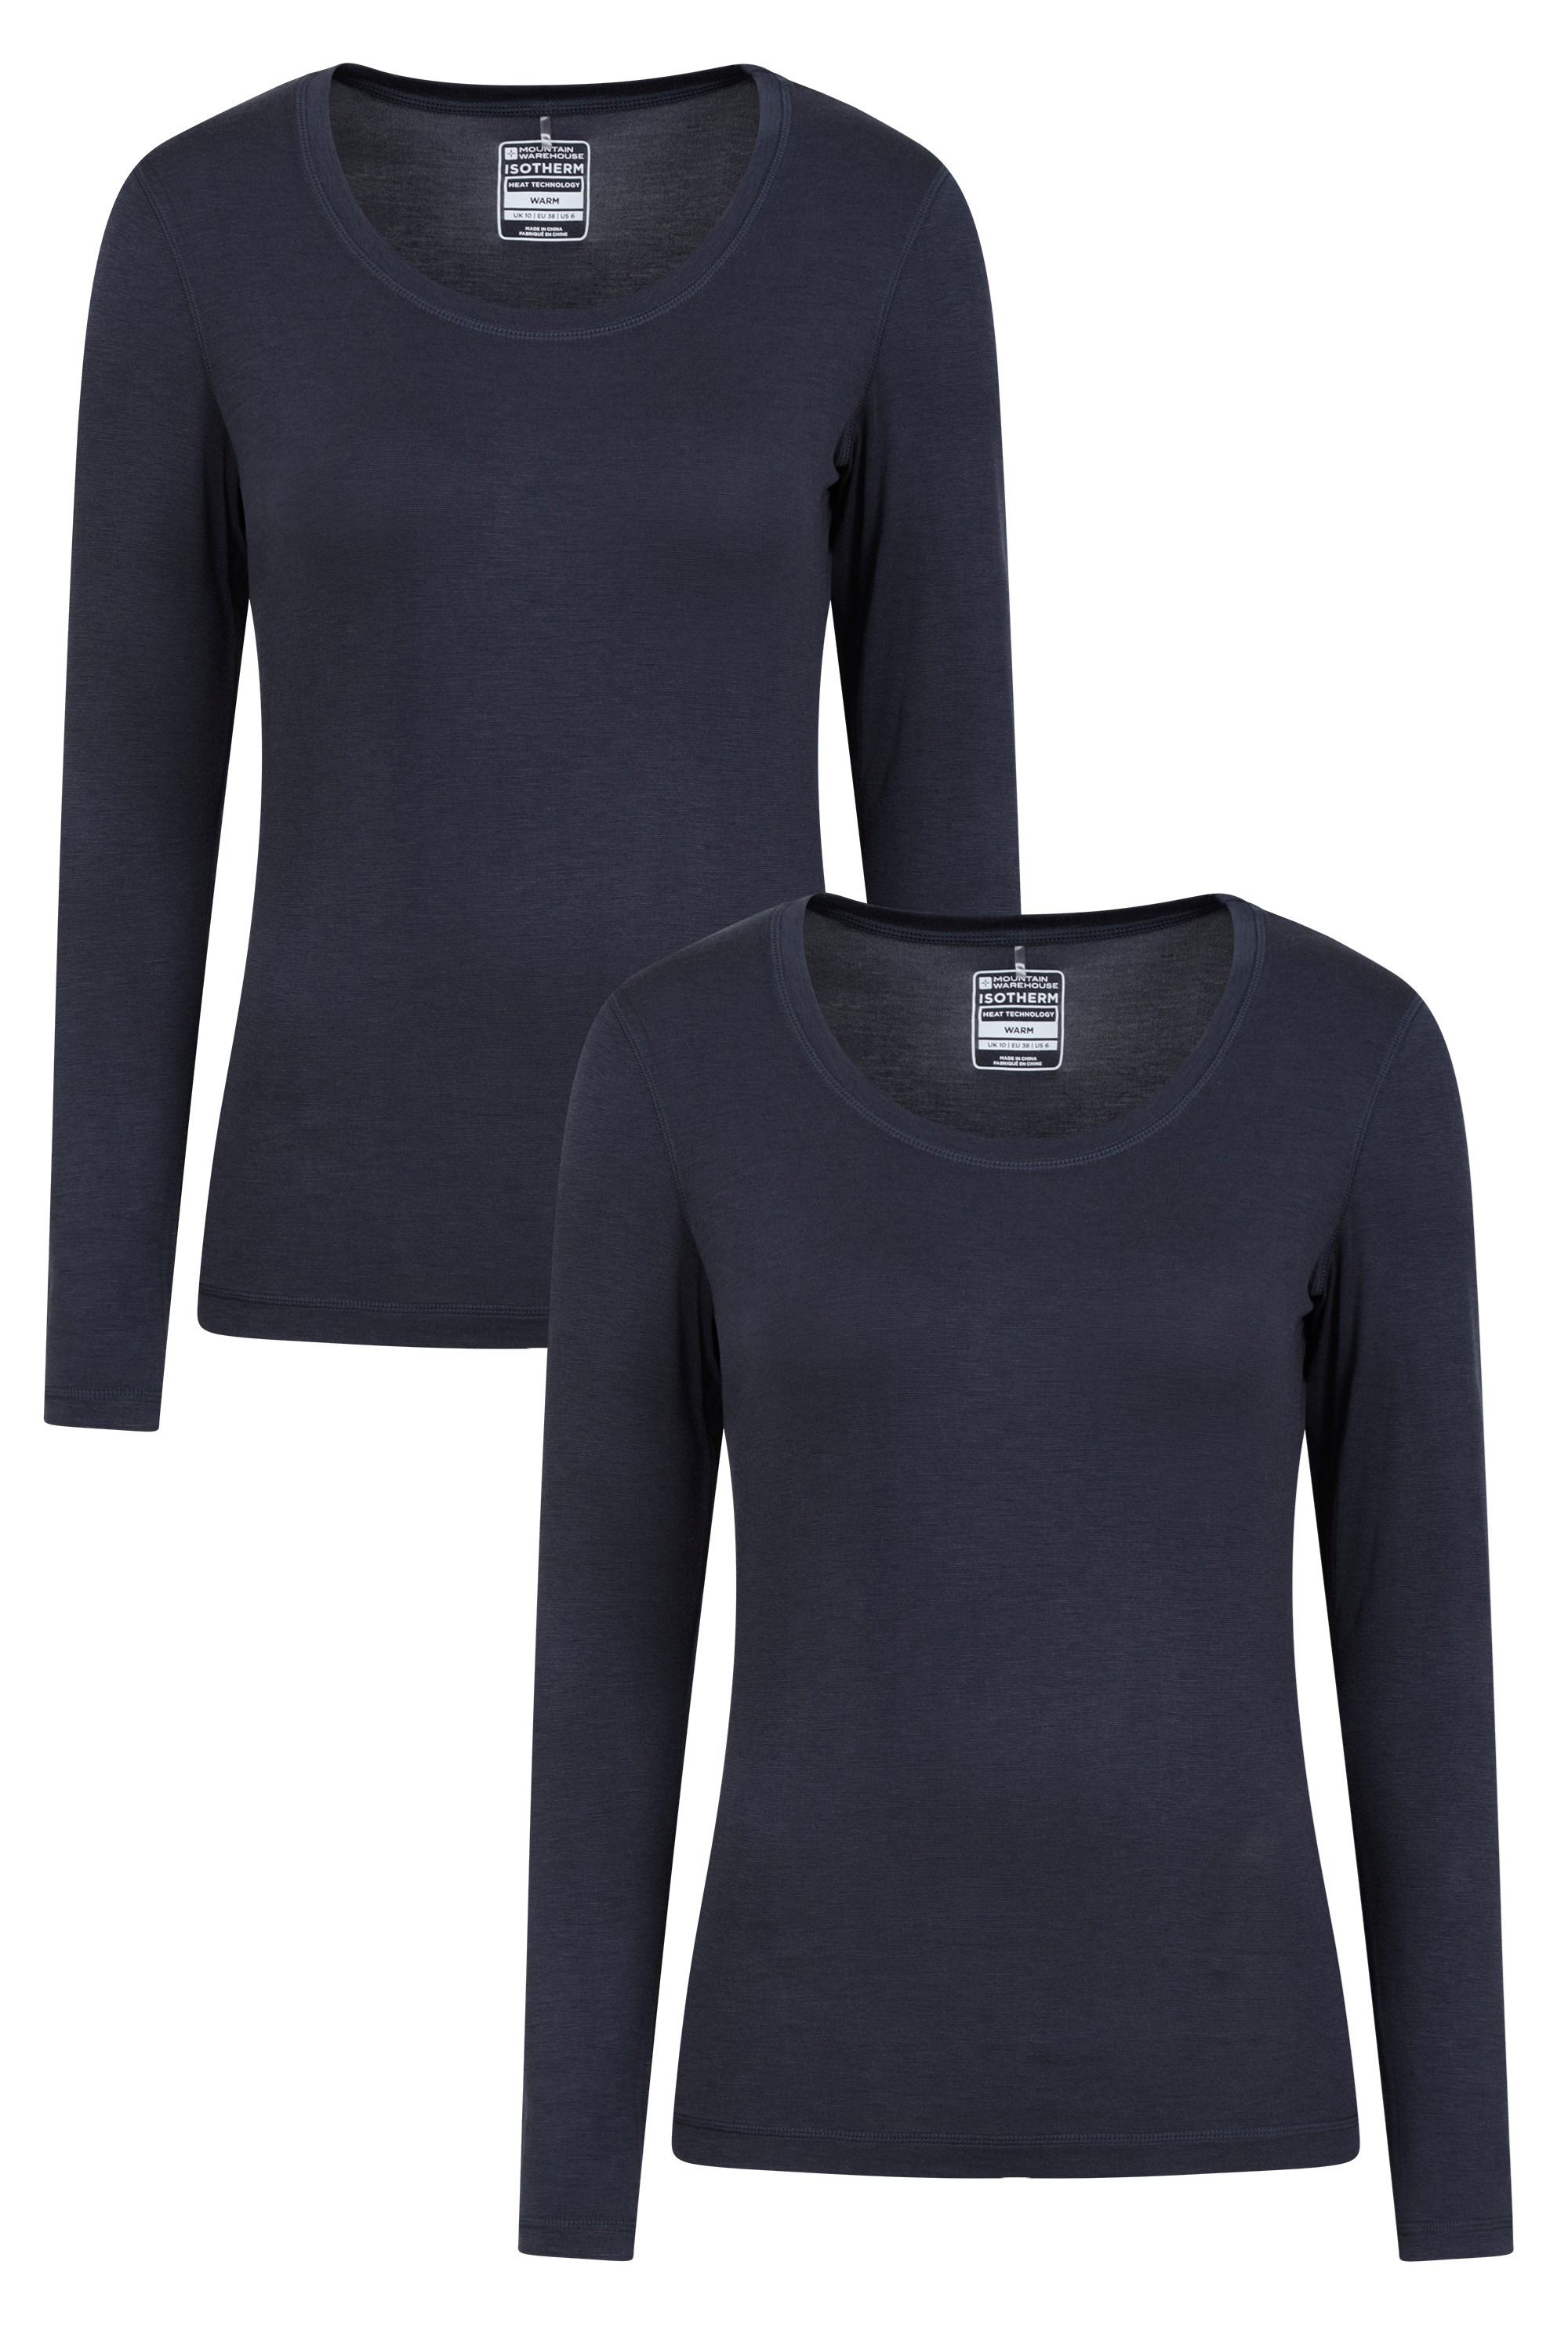 Camisoles & Tanks Lady Camisetas Thermiques Womans Thermal Tops